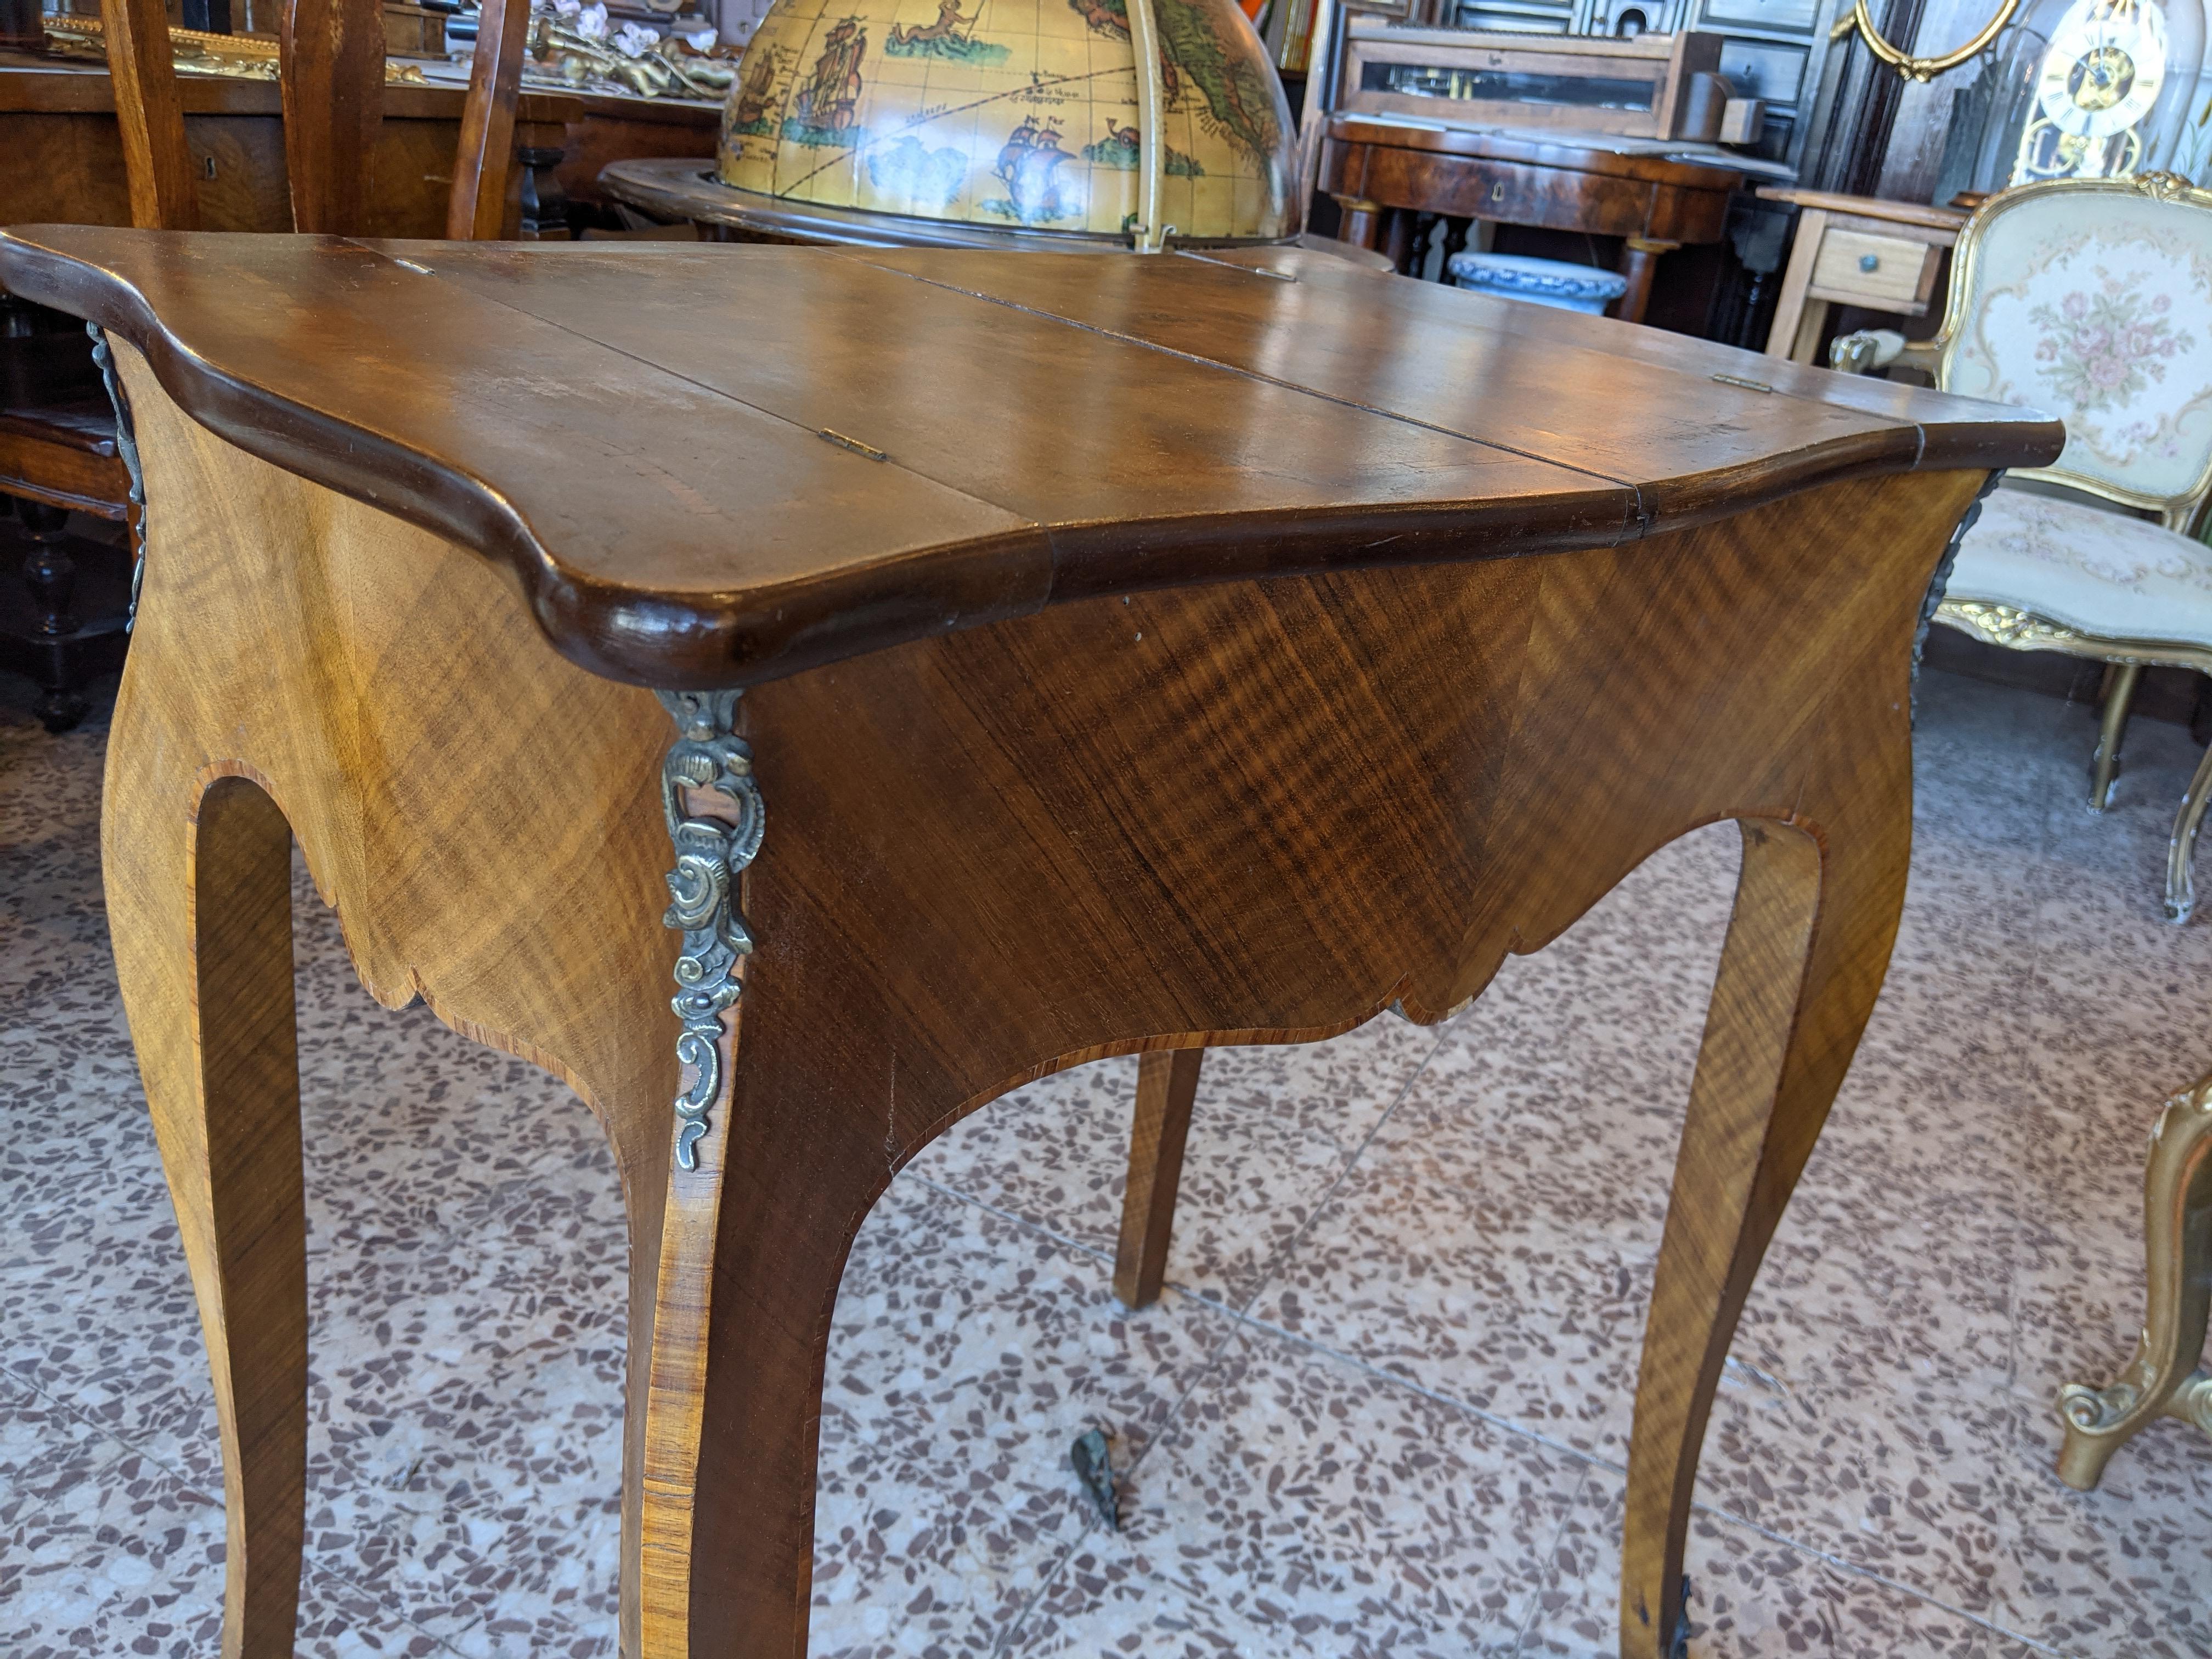 Inlaid table with opening on the top from which it is possible to access the contents of the drawer. In solid walnut, walnut burl and bois de rose. With brass decorations. Late 1800s

Please note that all of our items are shipped after a microwave